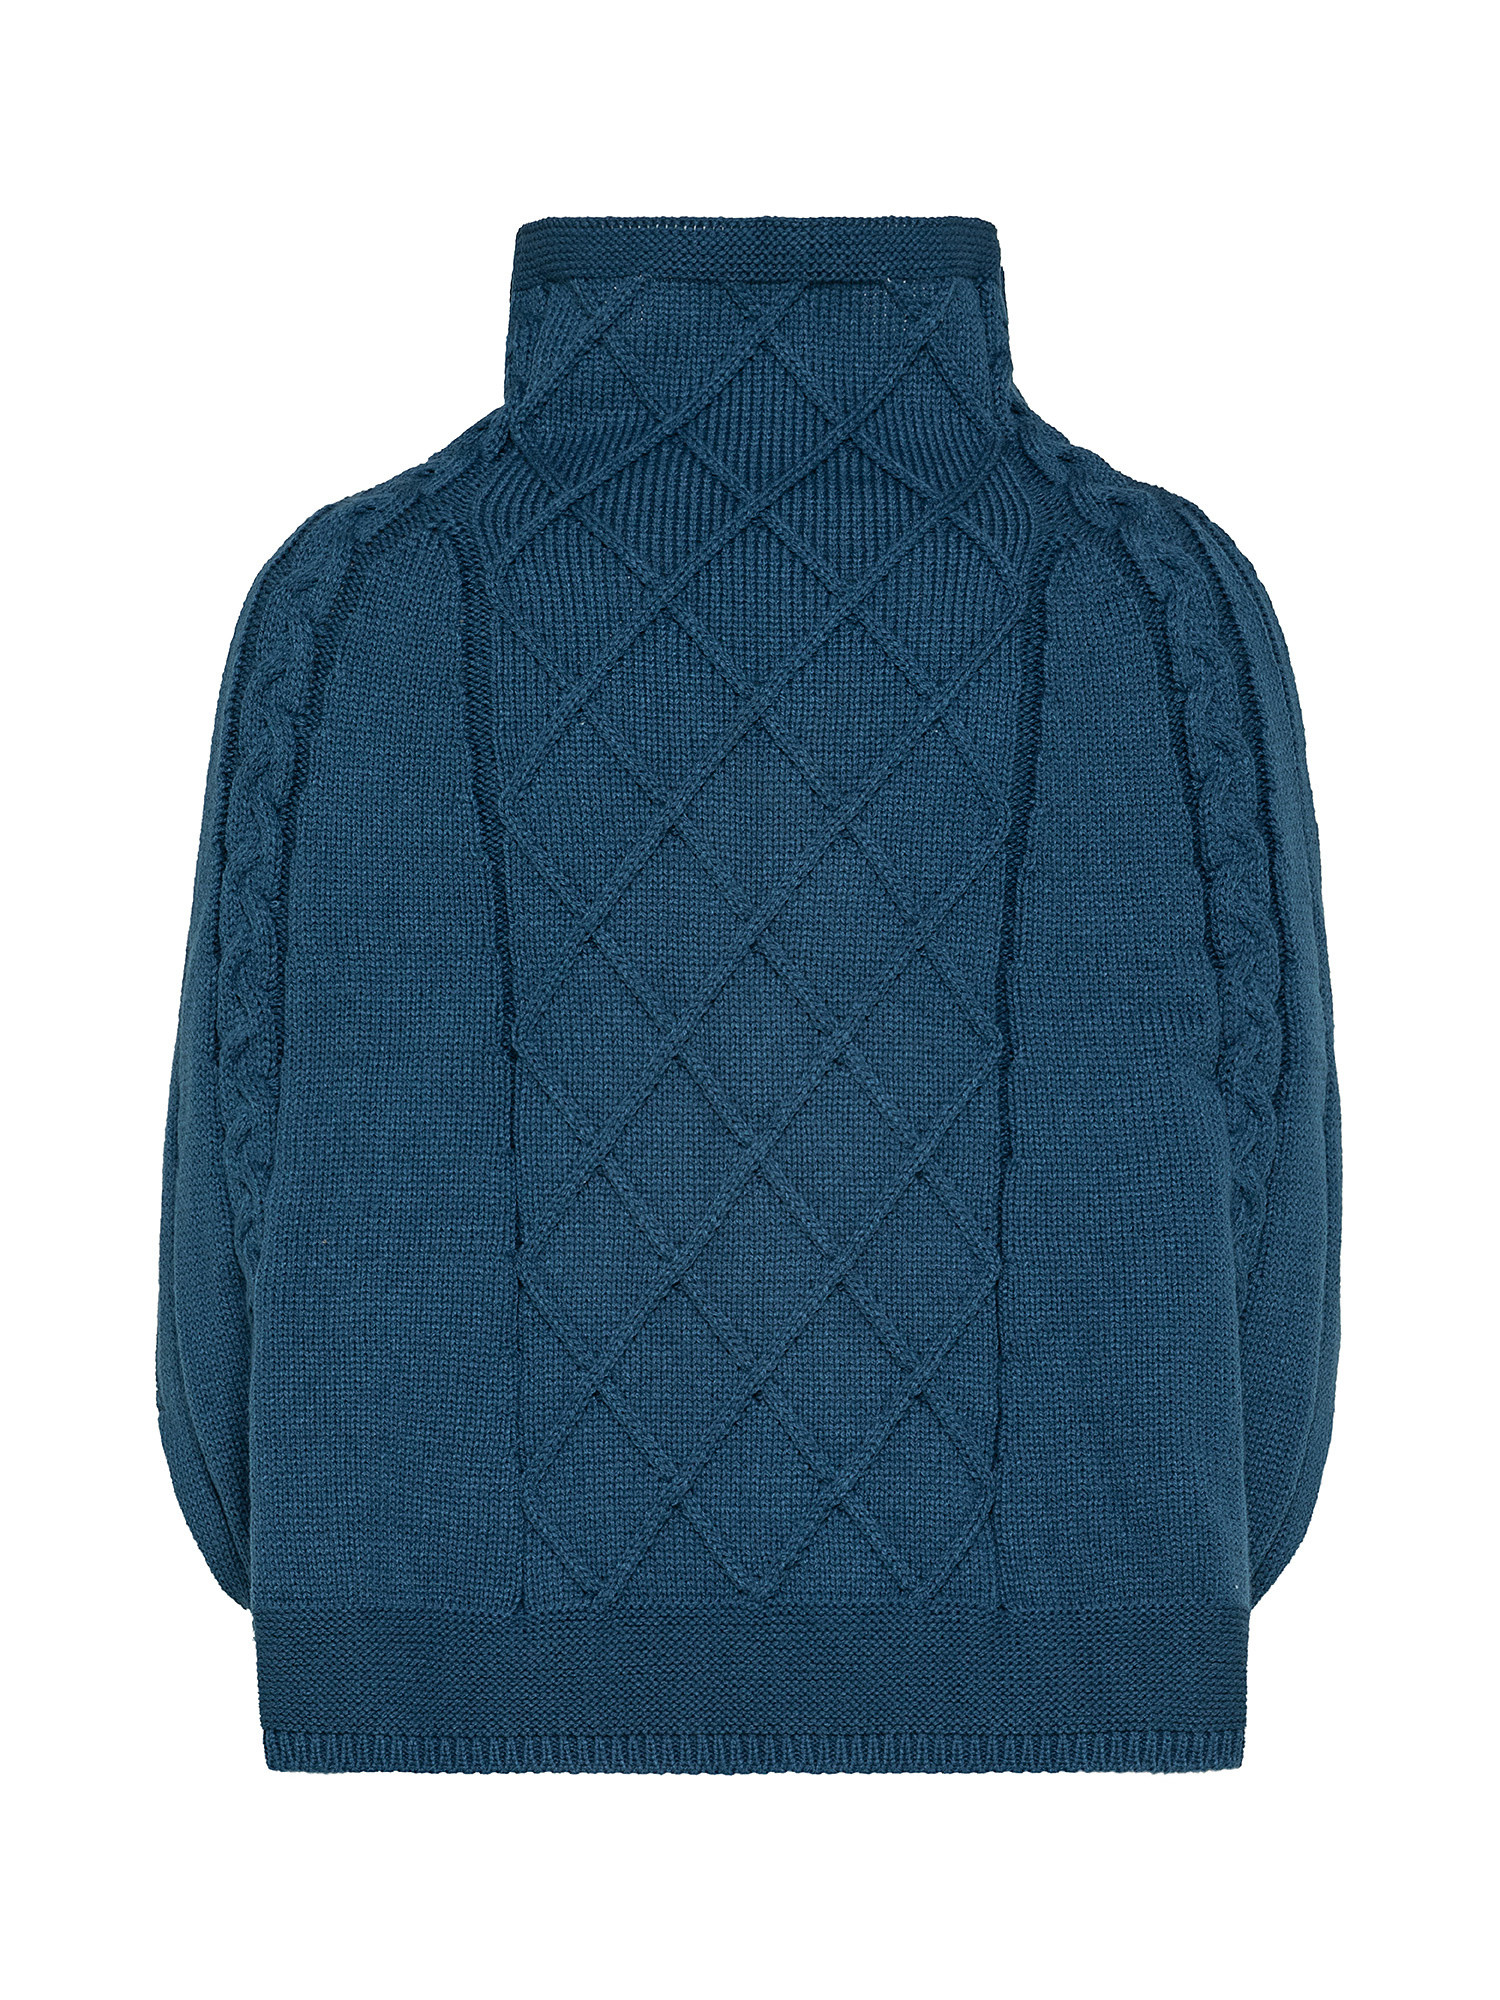 Poncho with diamond stitch, Green teal, large image number 1